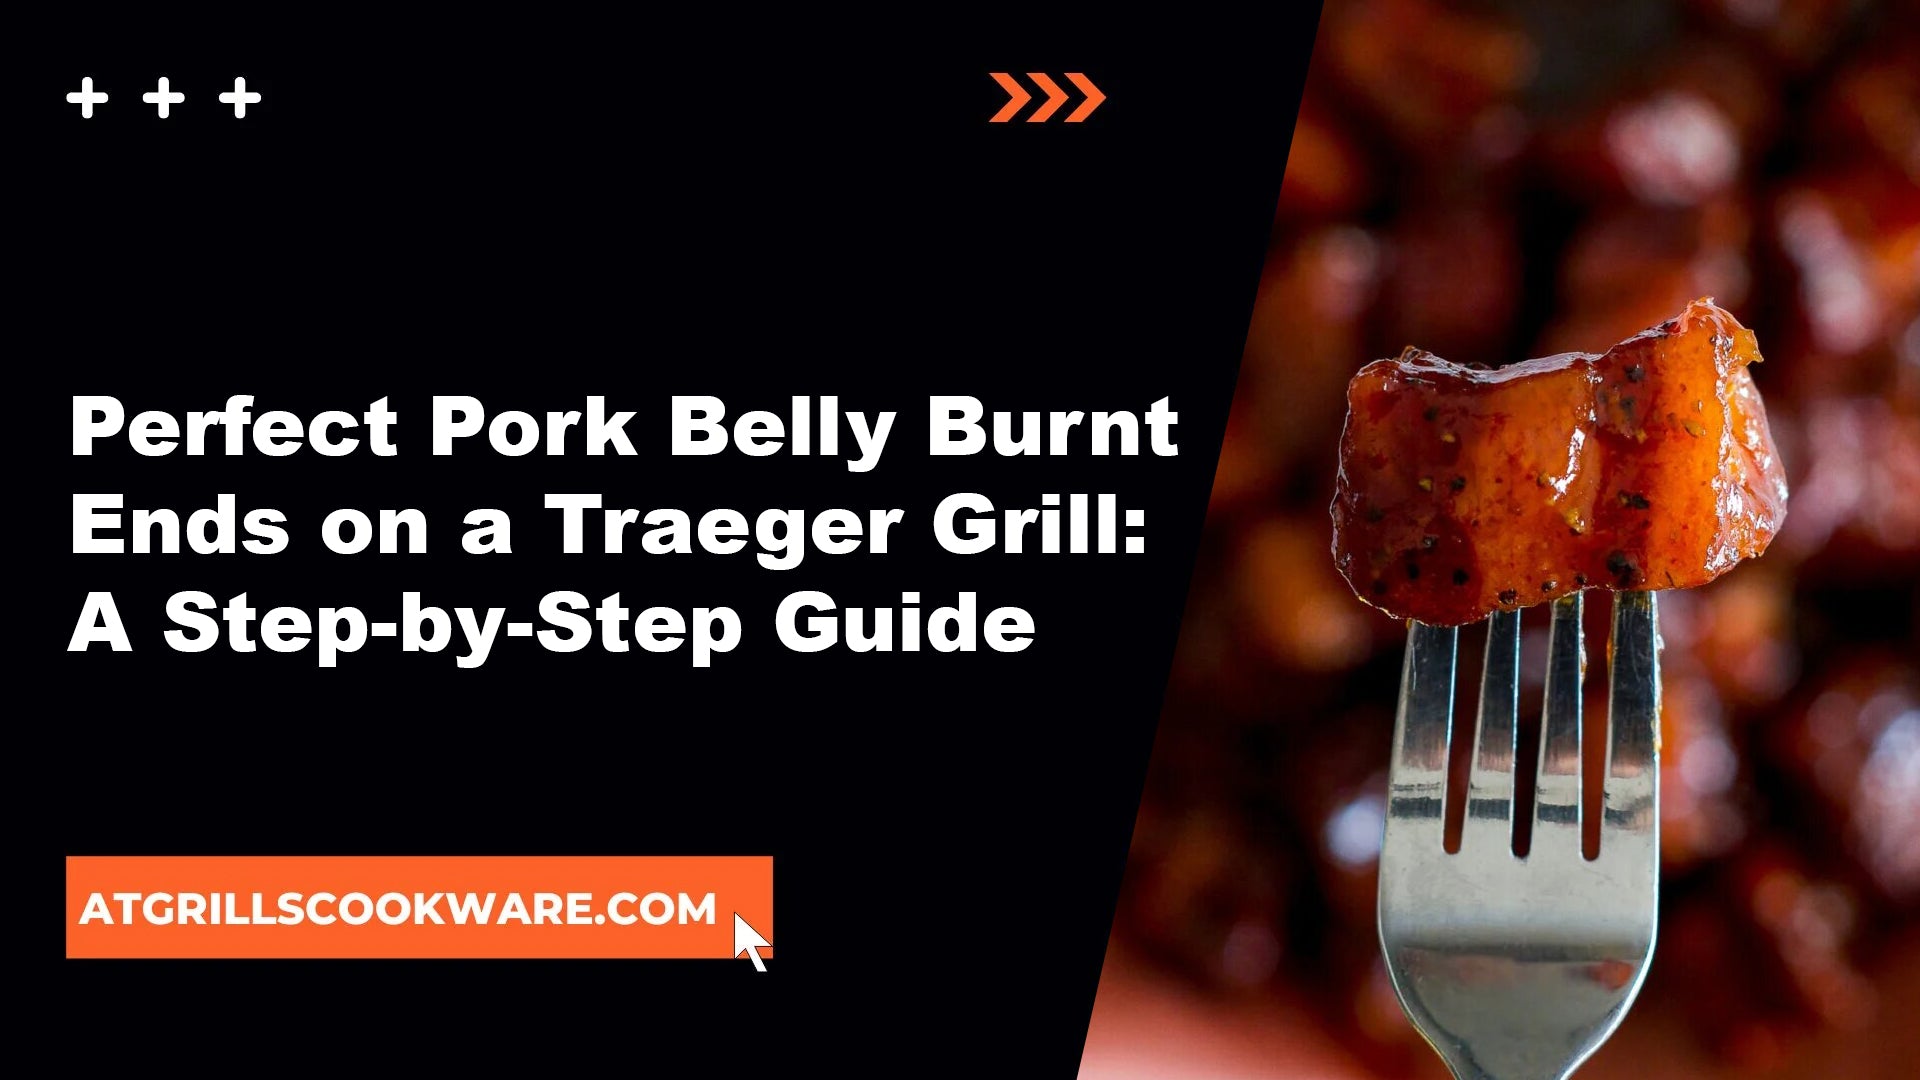 Perfect Pork Belly Burnt Ends on a Traeger Grill: A Step-by-Step Guide